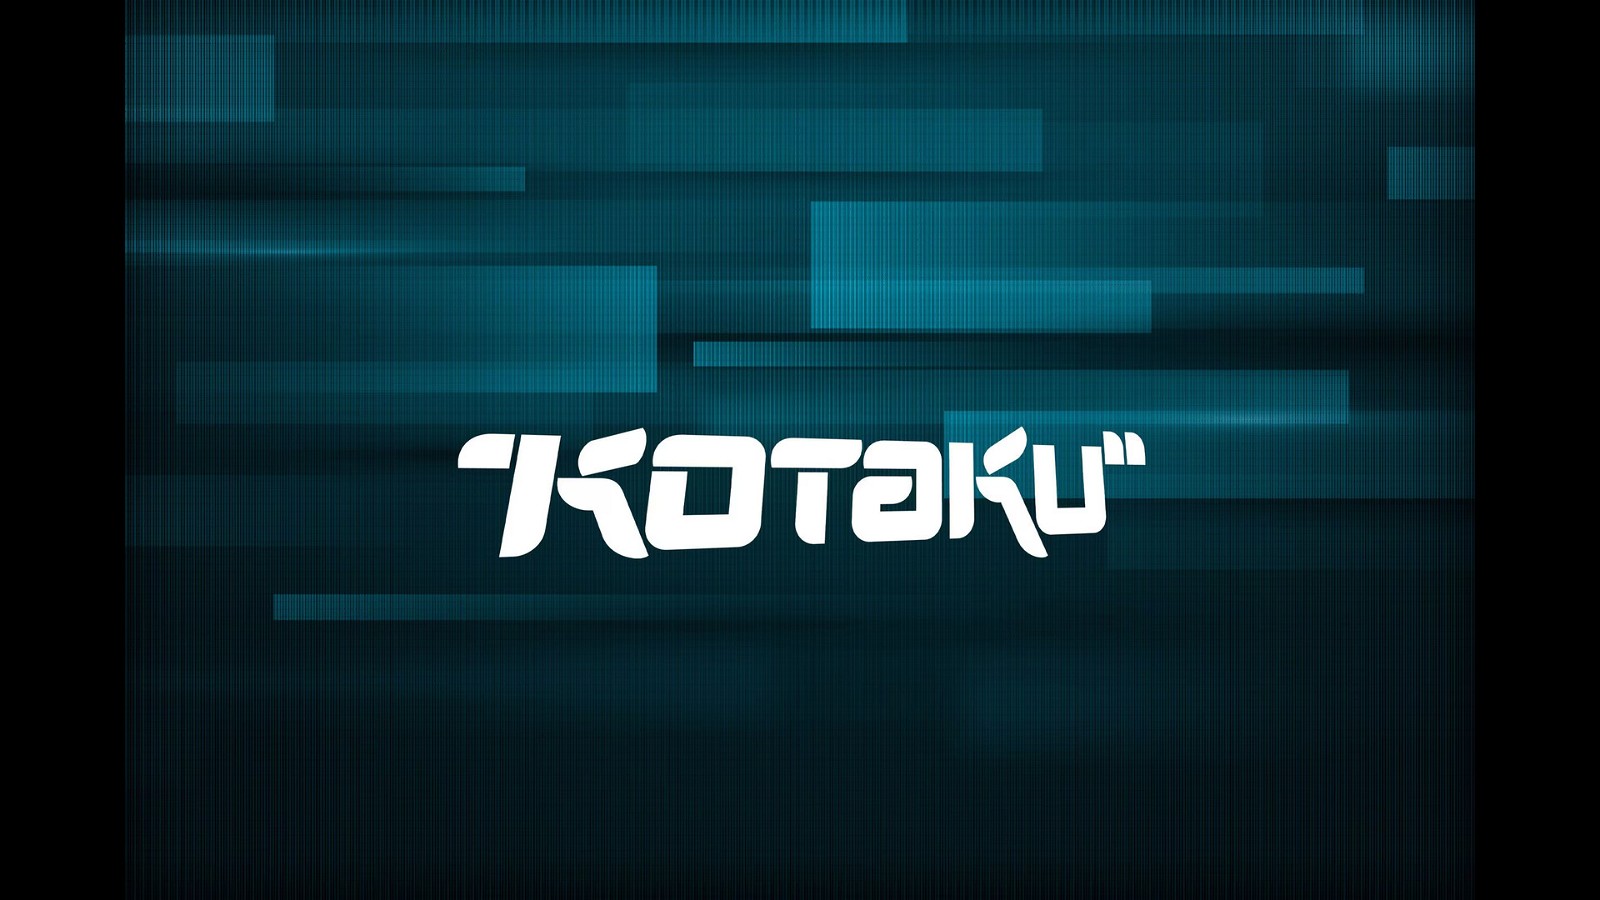 Kotaku Reportedly Fires its Editor-in-Chief, Patricia Hernandez